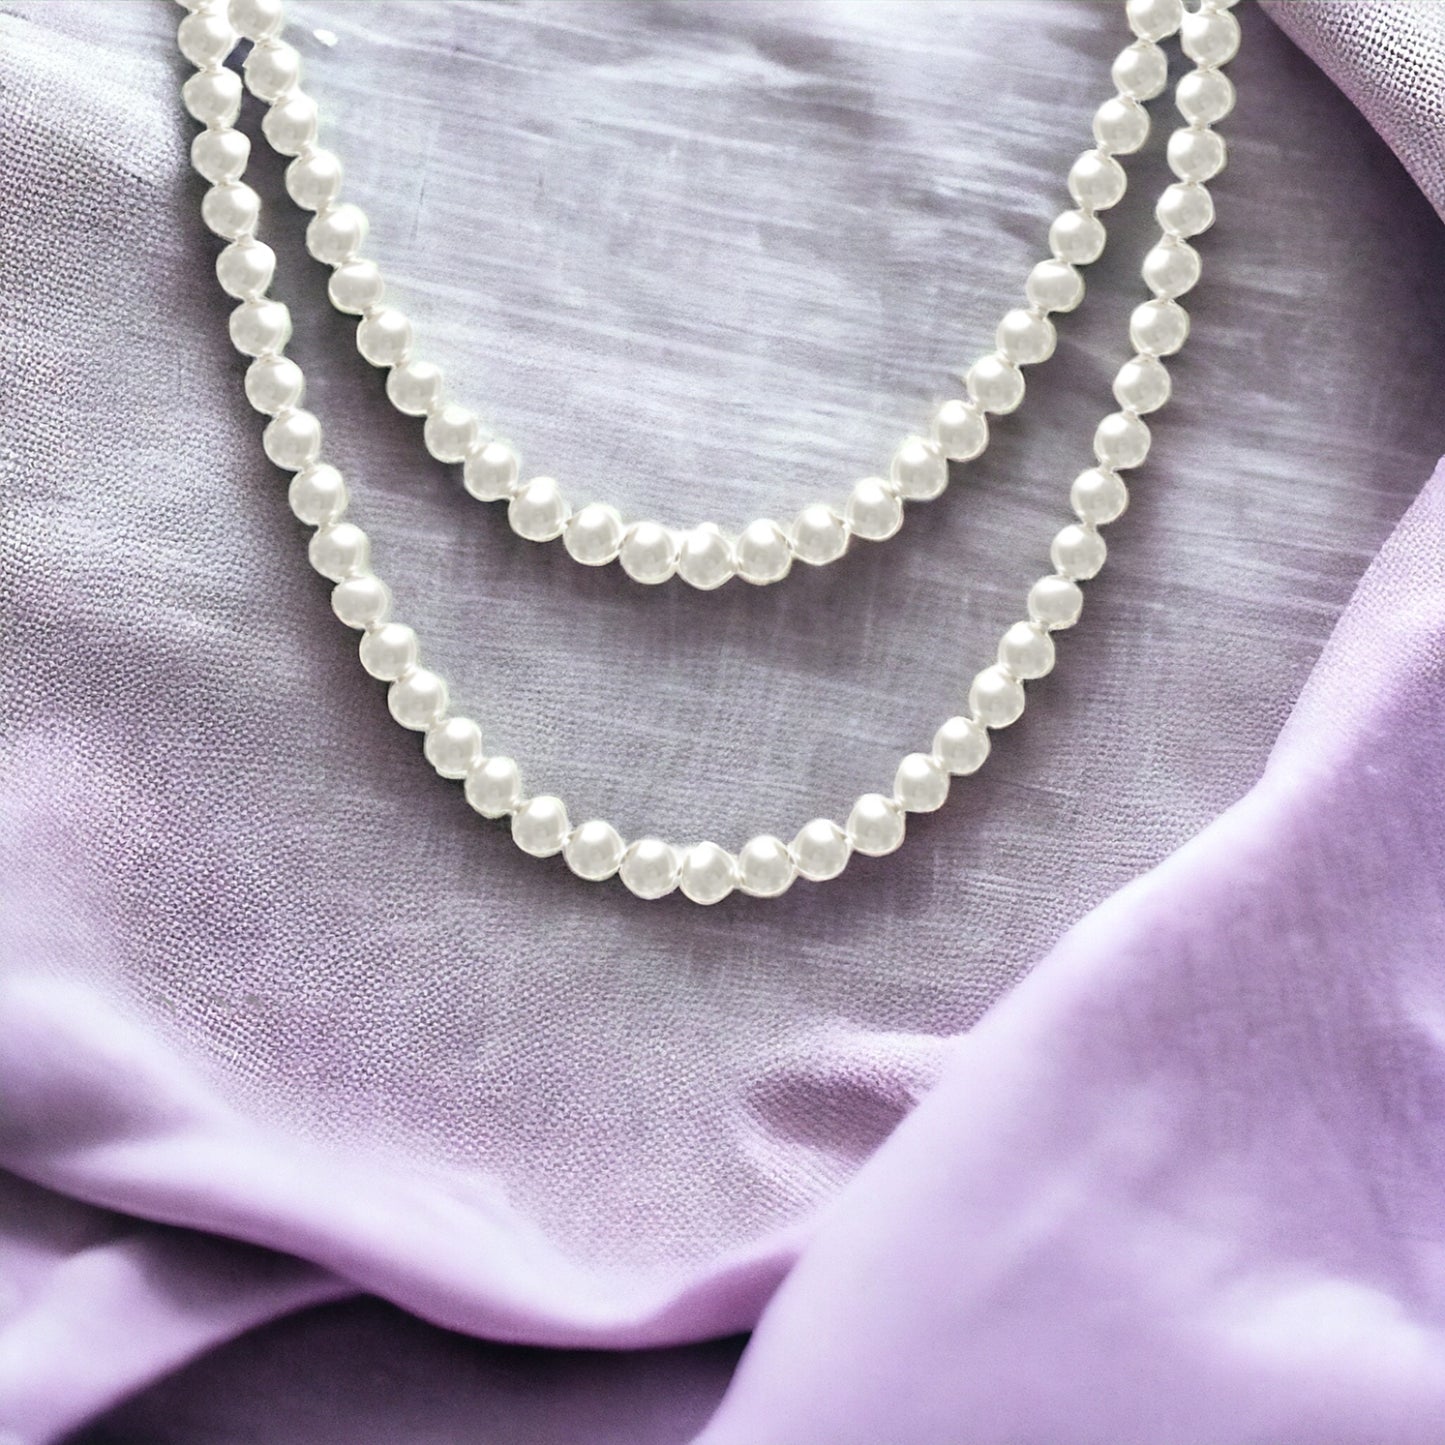 60" Pearl Necklace - Marisa's Shopping Network 